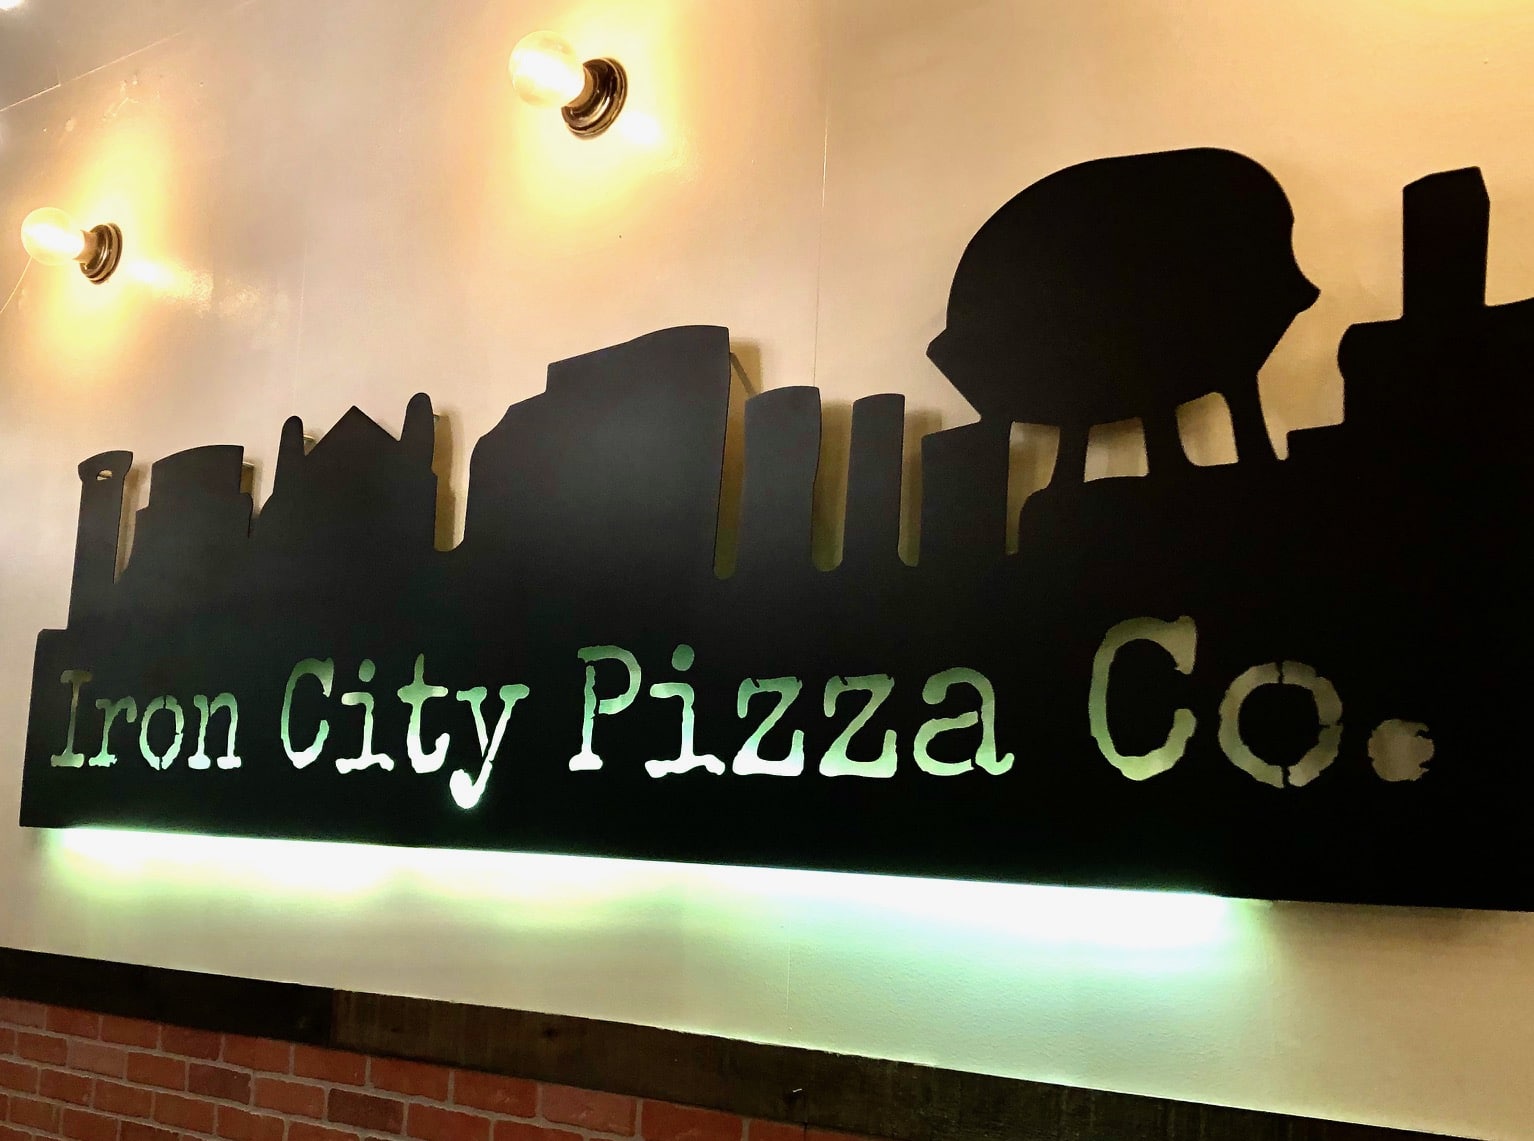 Iron City Pizza Rojo, Iron City Pizza, Black Market, received 95 and above food service scores in January